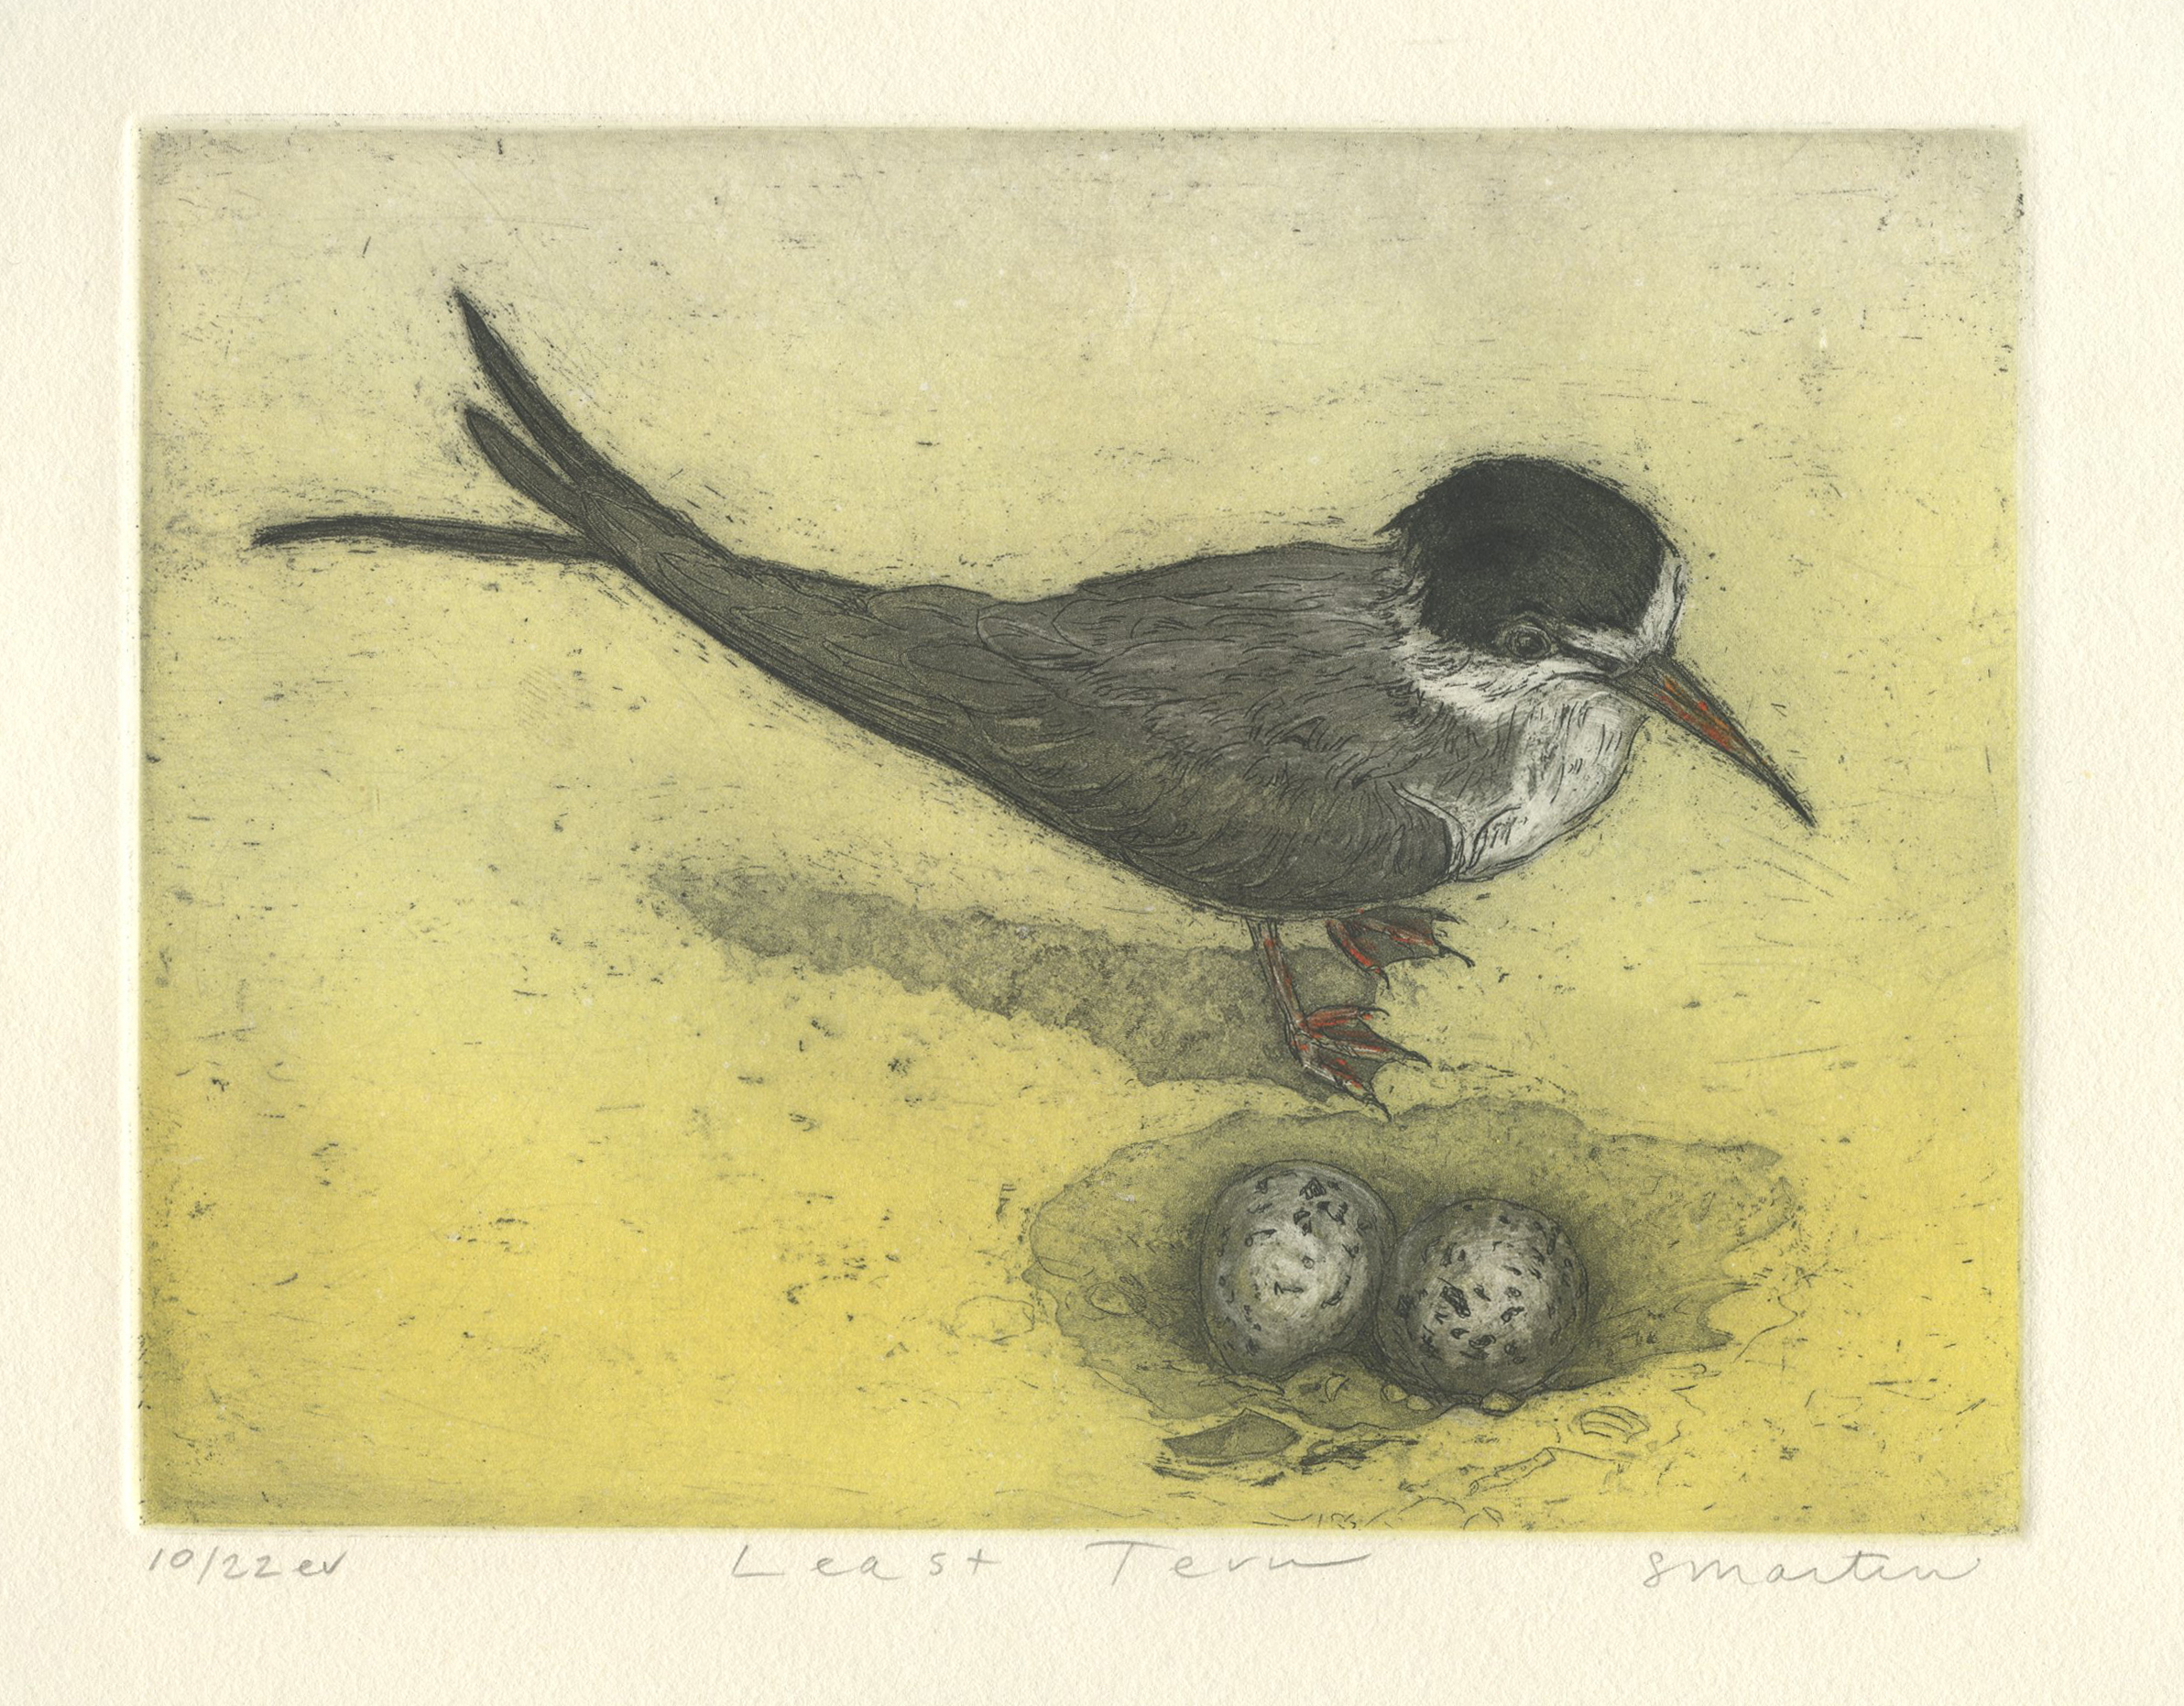 color etching of a bird standing over two eggs in a sandy depression